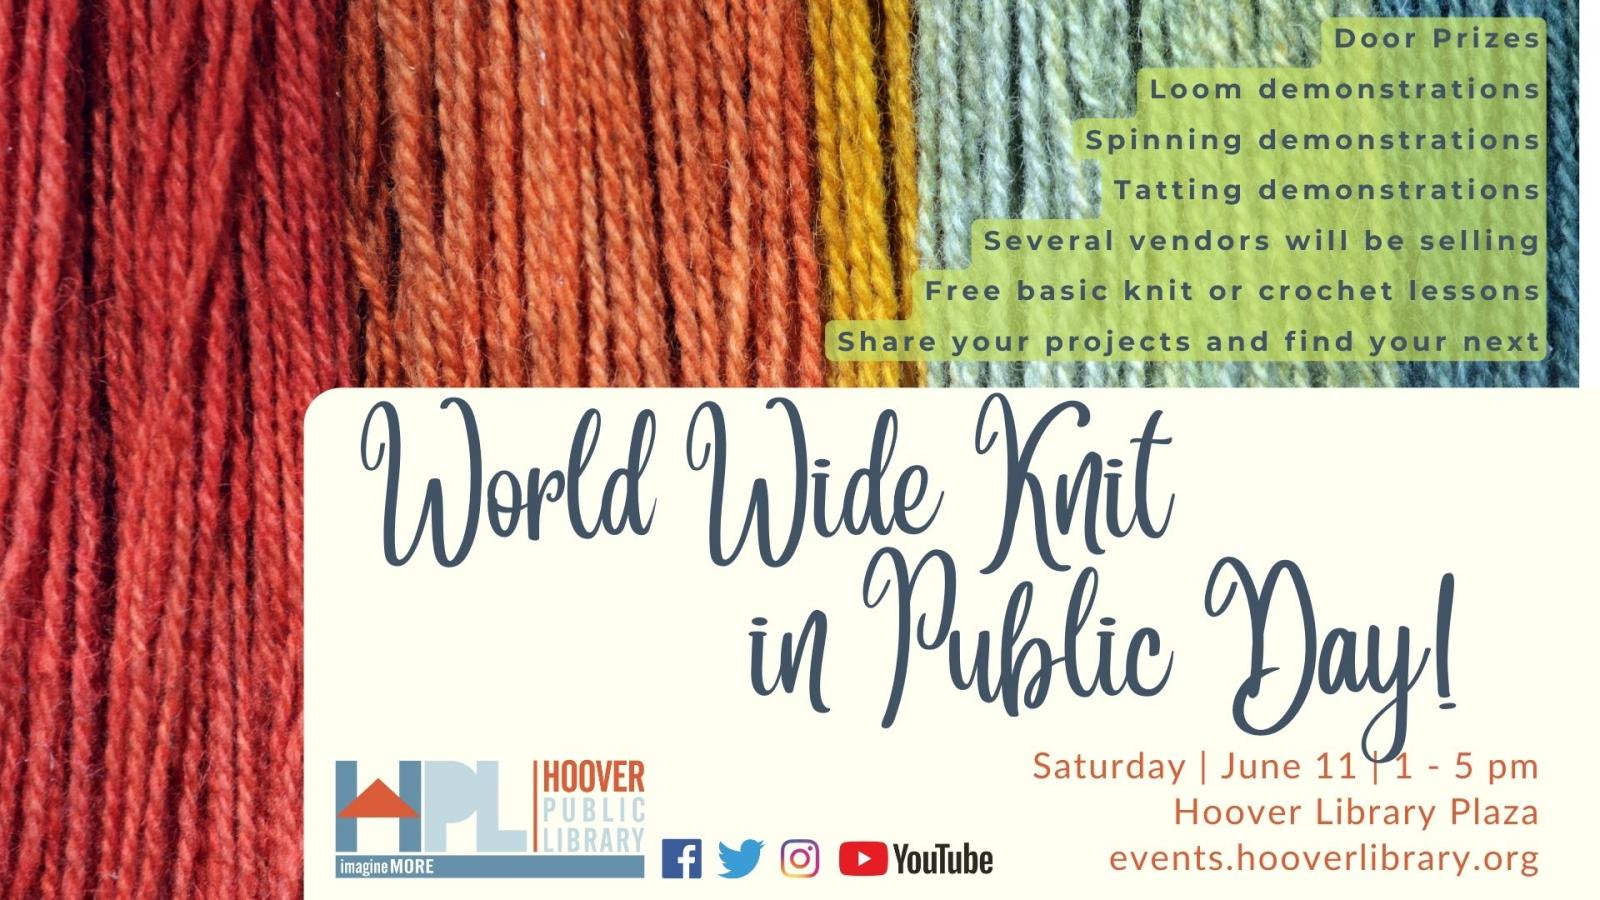 World Wide Knit in Public Day! Door Prizes, Loom Instruction, Spinning Demonstration, Tatting, Several Vendors will be Selling, Free Basic Knit or Crochet Lessons, Share your projects and Find your next. Saturday, June 11 from 1pm to 5pm